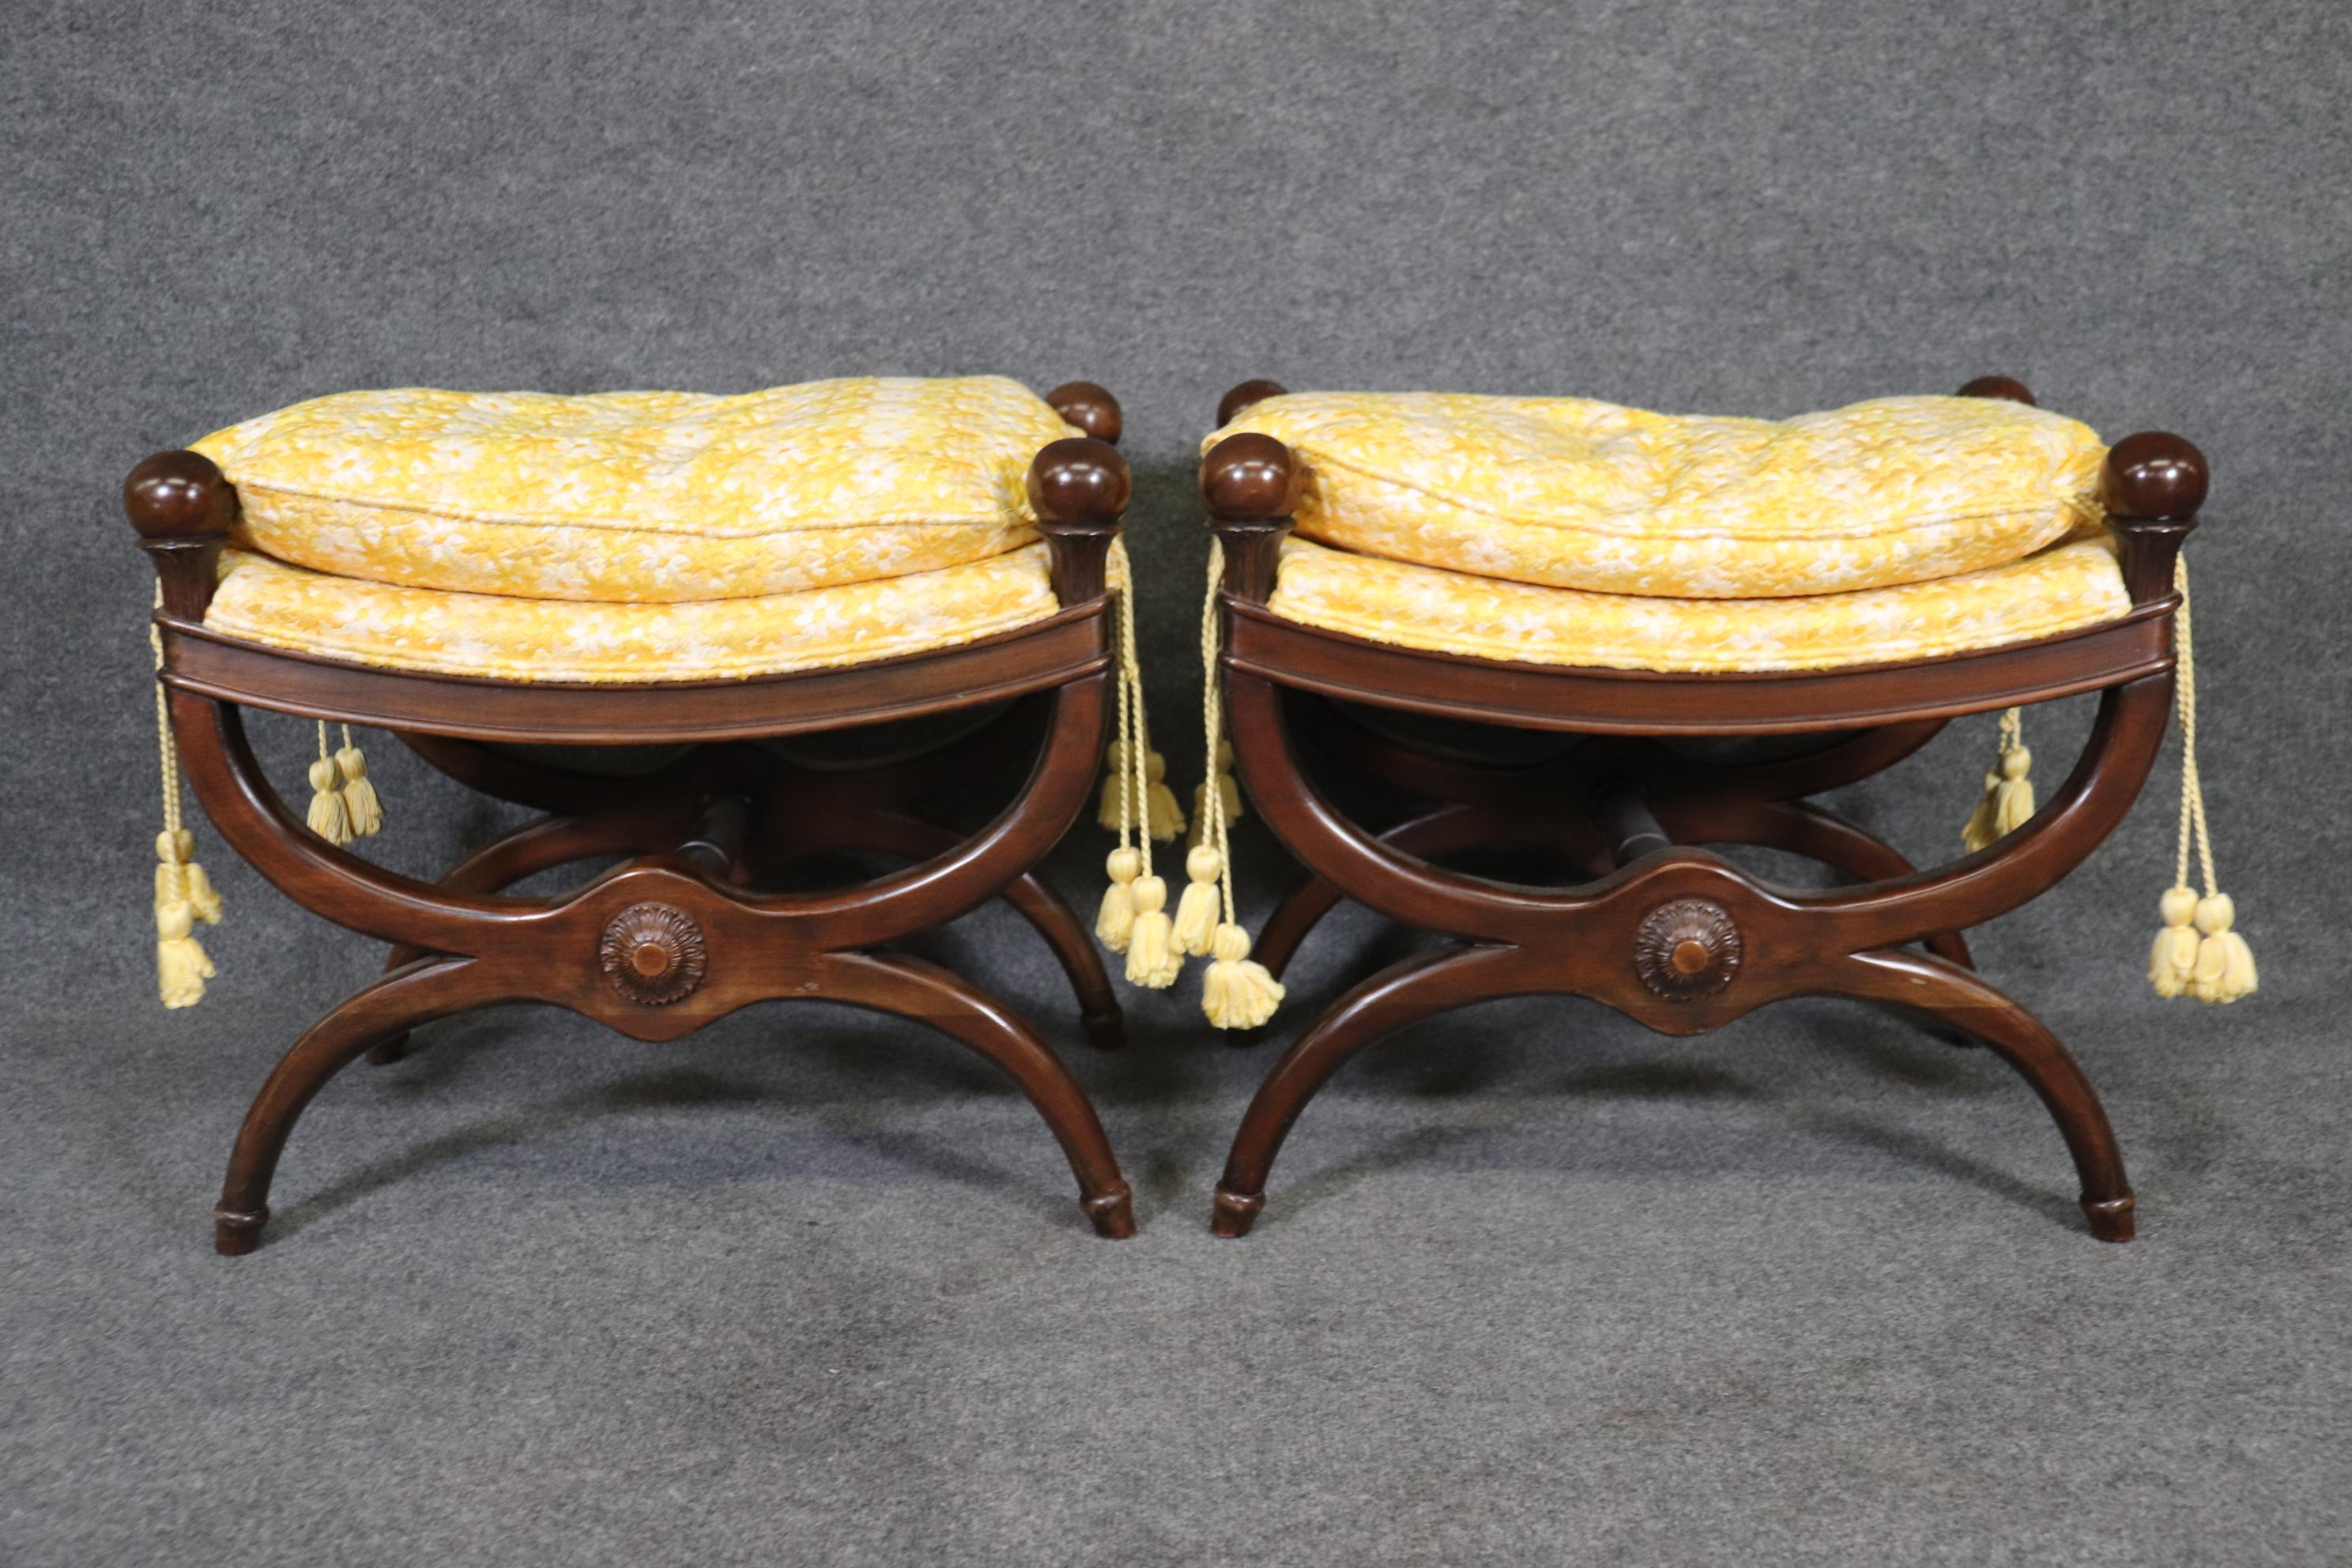 Pair Maison Jansen Attributed Mahogany French Directoire Footstools, Circa 1960s For Sale 1